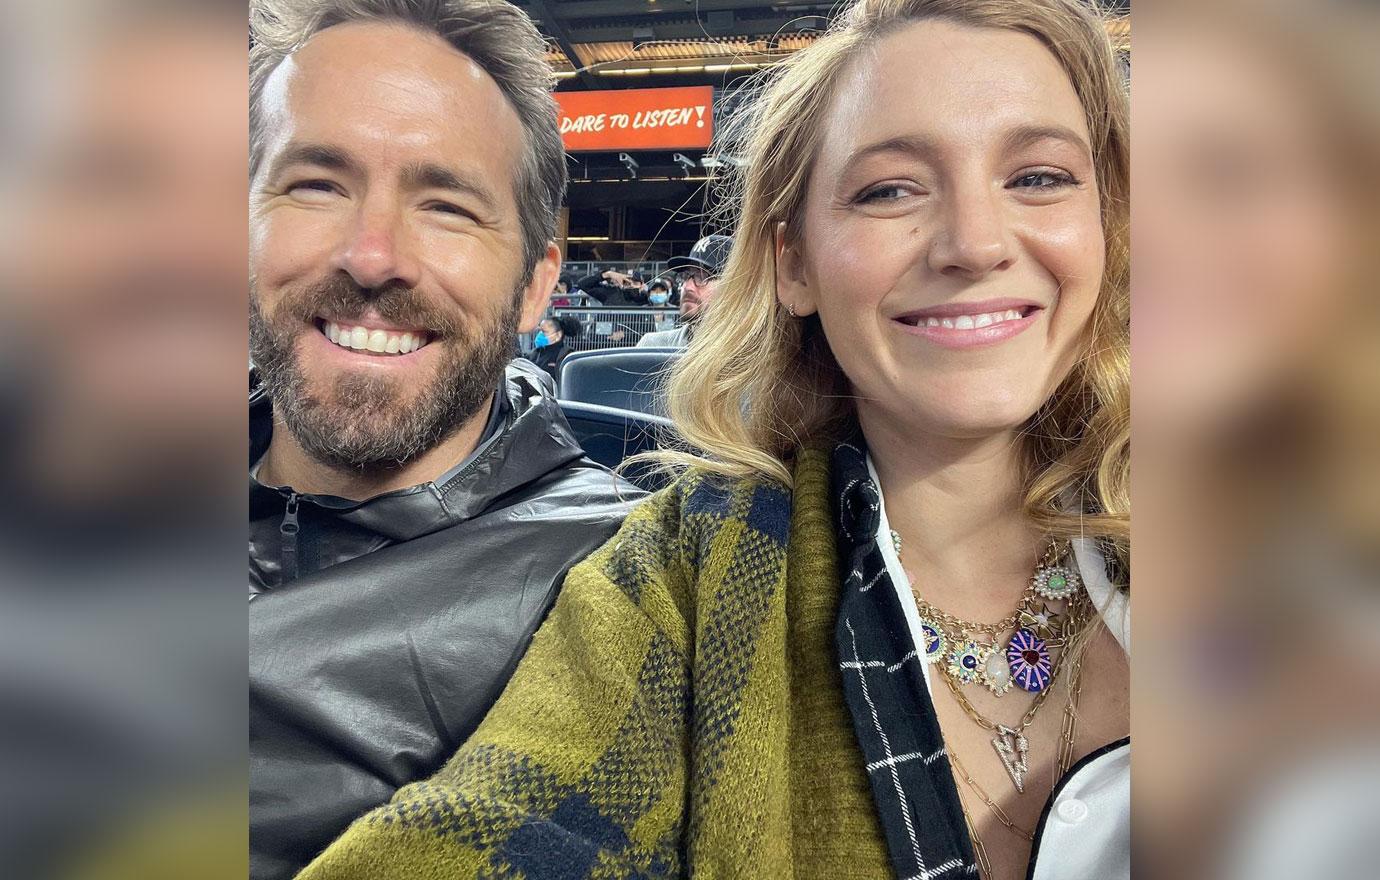 Of Course, Blake Lively And Ryan Reynolds Were Couples Goals On